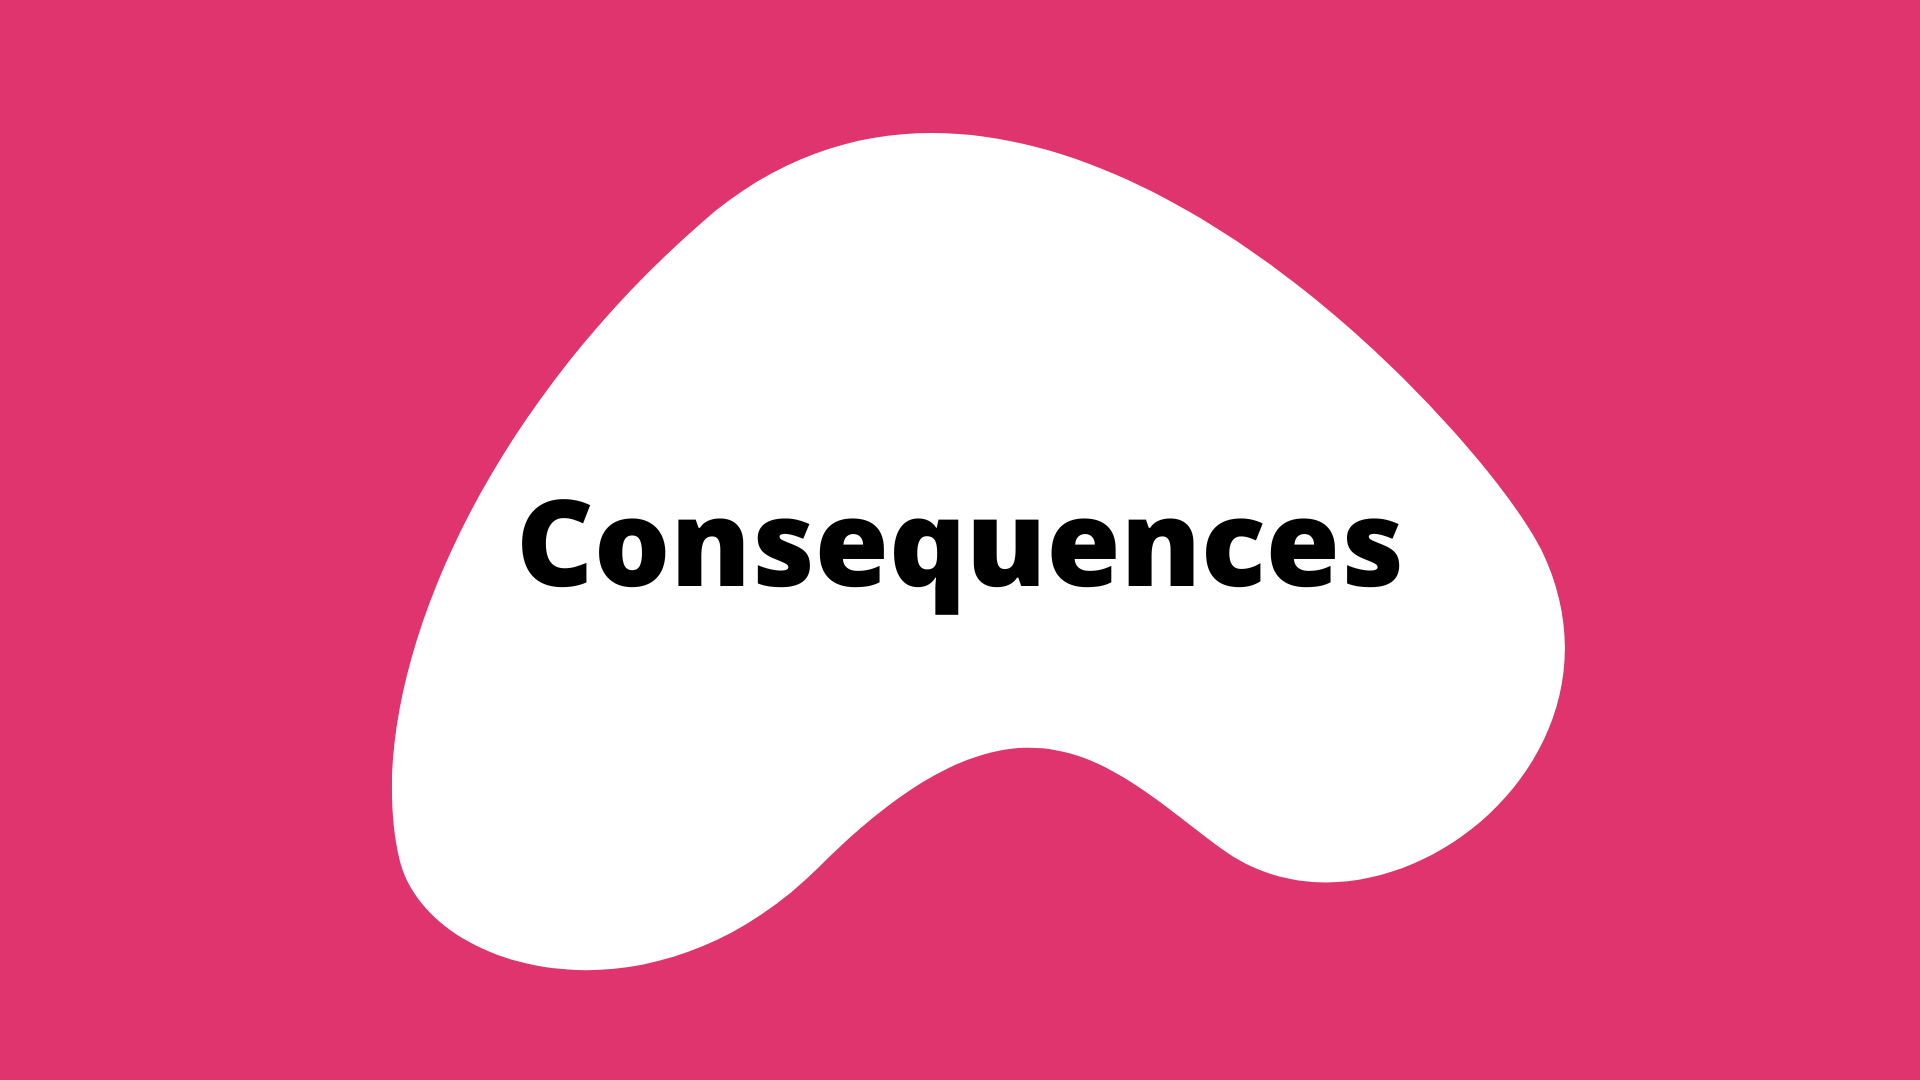 "Consequences" activity button. A pink square with a white blob in the center. The title is in the blob.